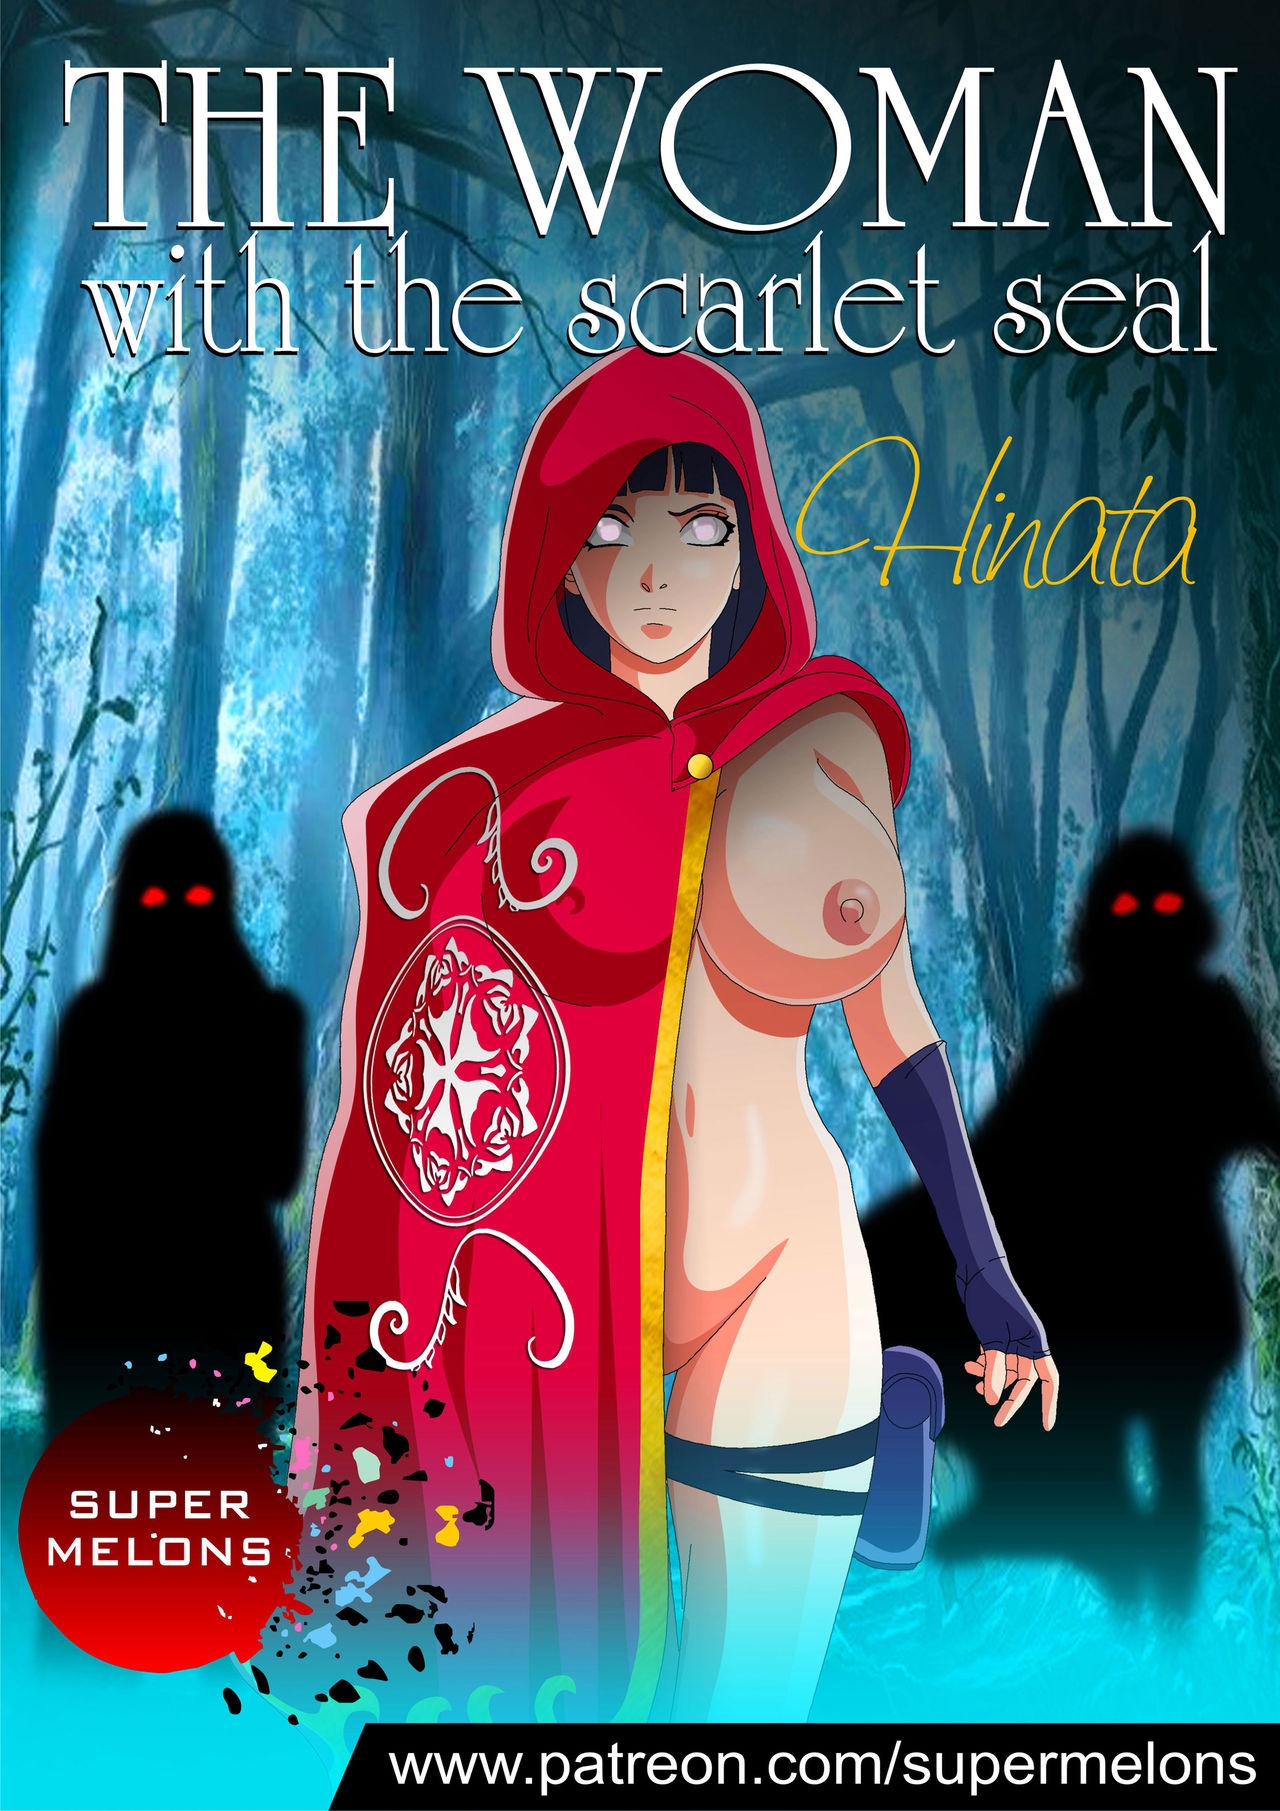 [Super Melons] The Woman with the Scarlet Seal (Naruto) 1